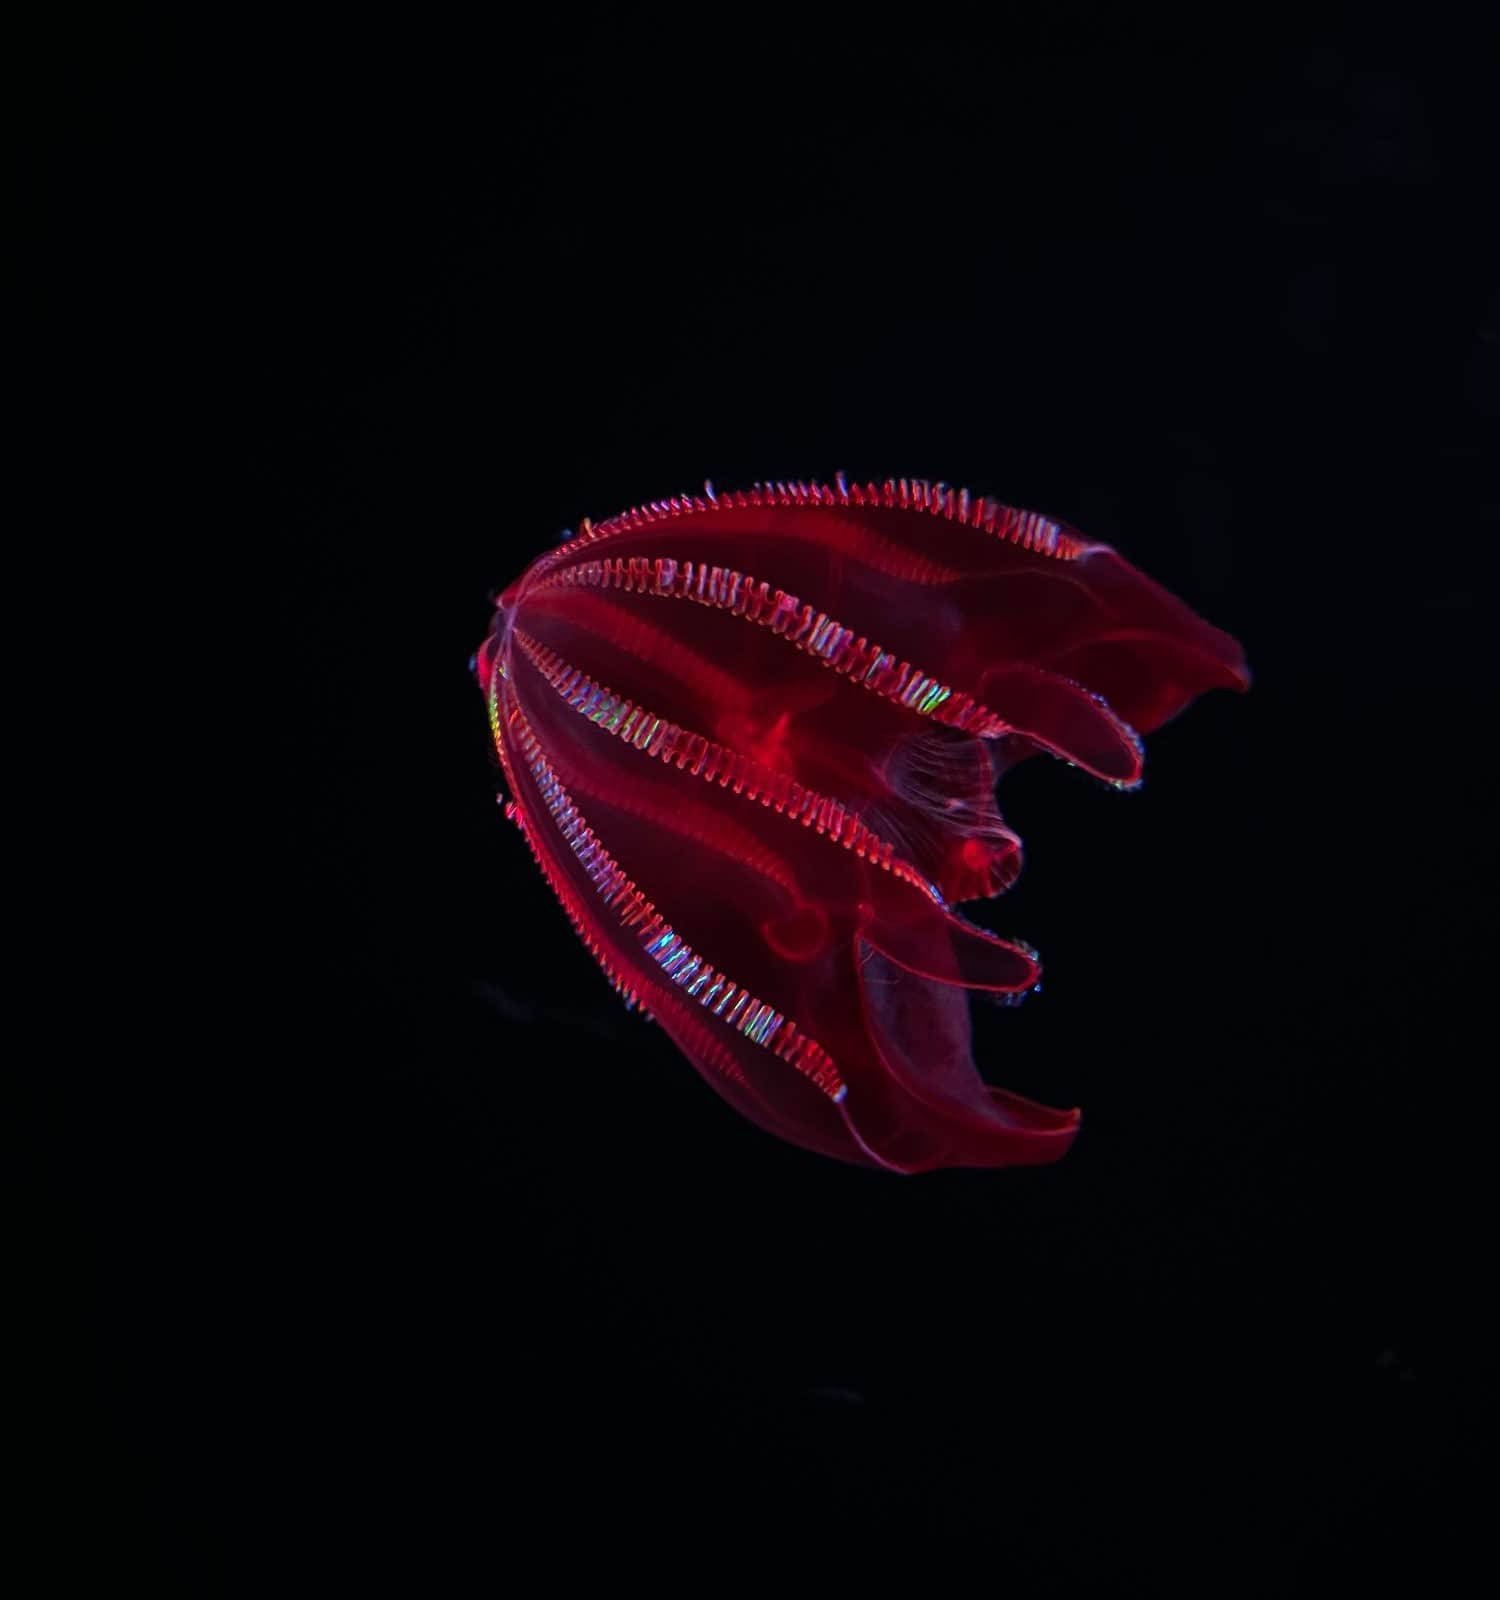 A Bloodybelly comb jelly, Lampocteis cruentiventer